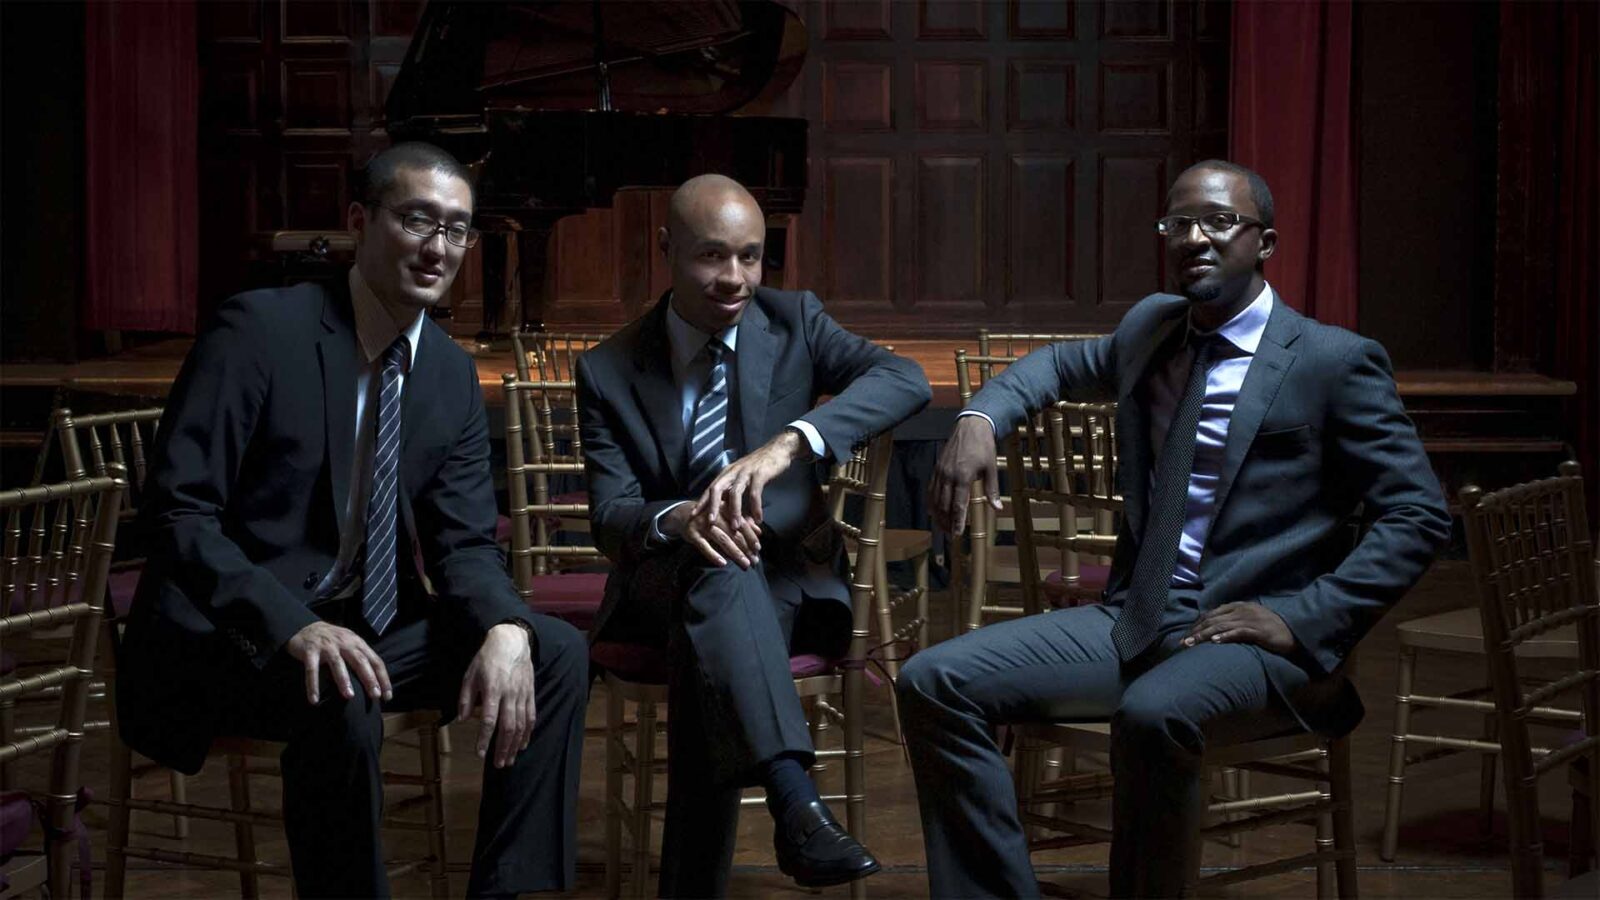 Three gentlemen in suits are sitting and looking at the camera. At their back, a black piano on a stage appears.